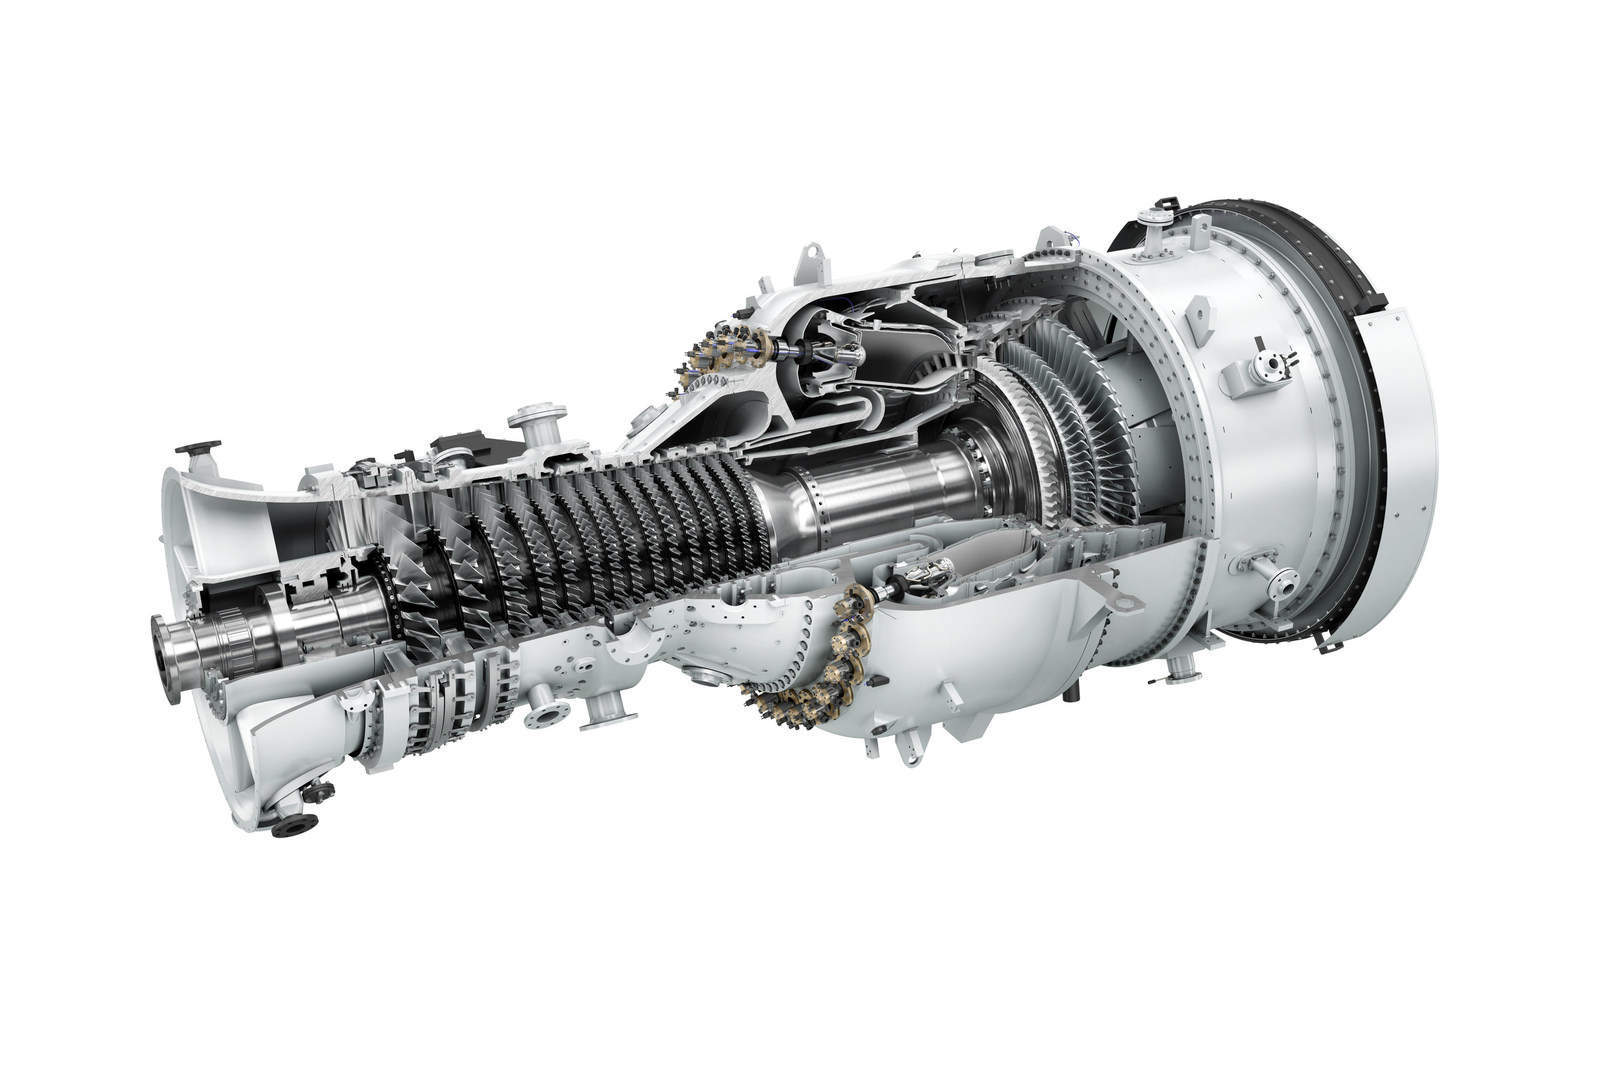 Siemens to deliver gas turbines for cogeneration project in Canada